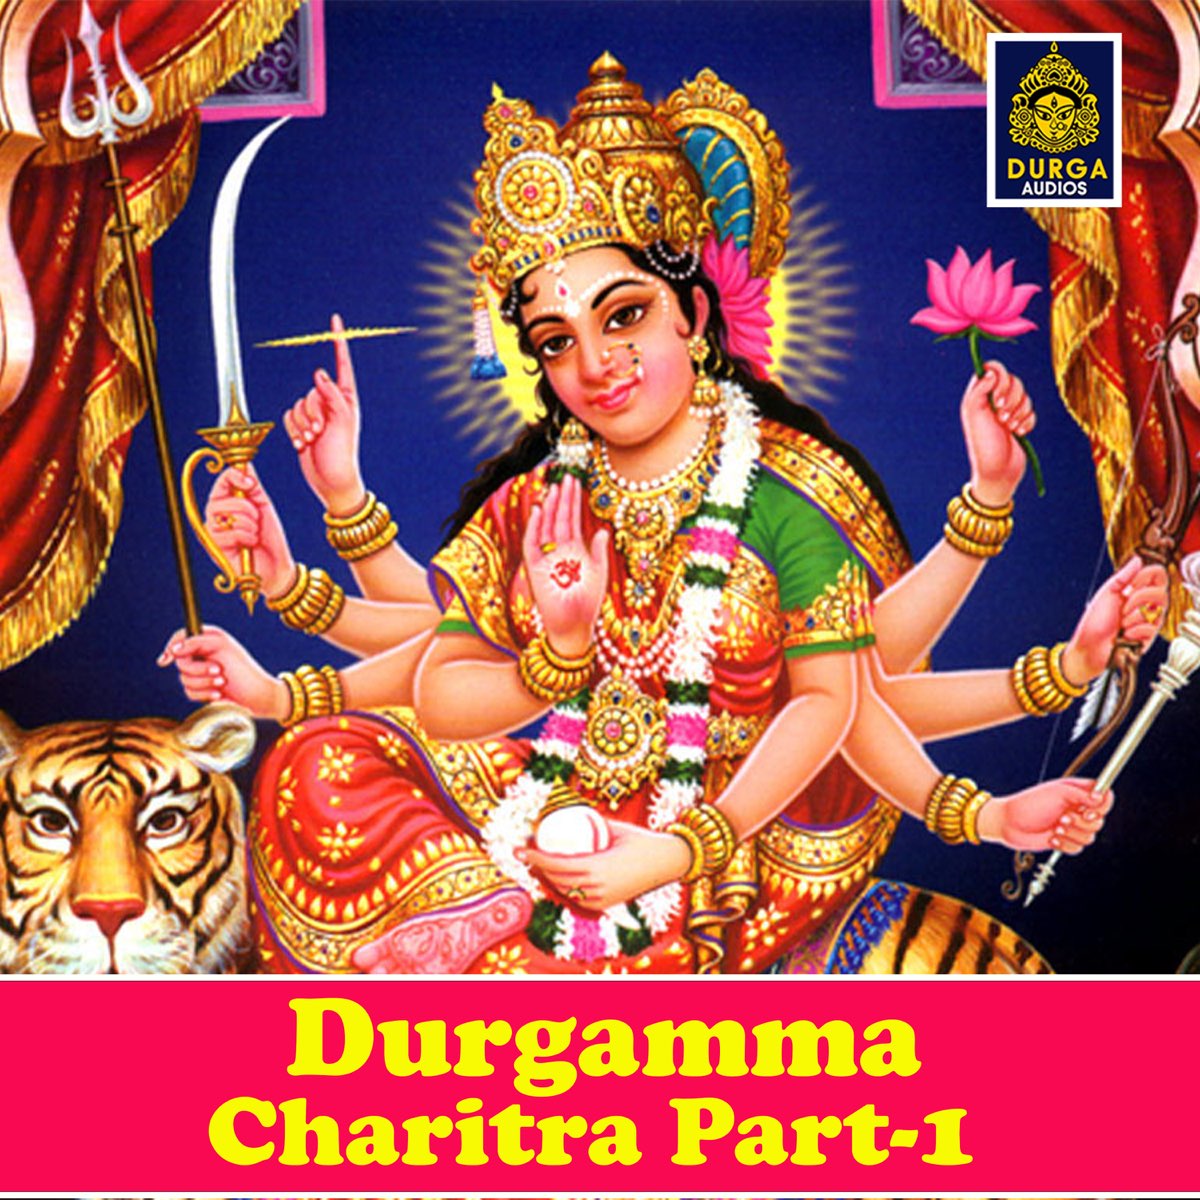 Durgamma Charitra, Pt. 1 - EP by A. Ramadevi on Apple Music